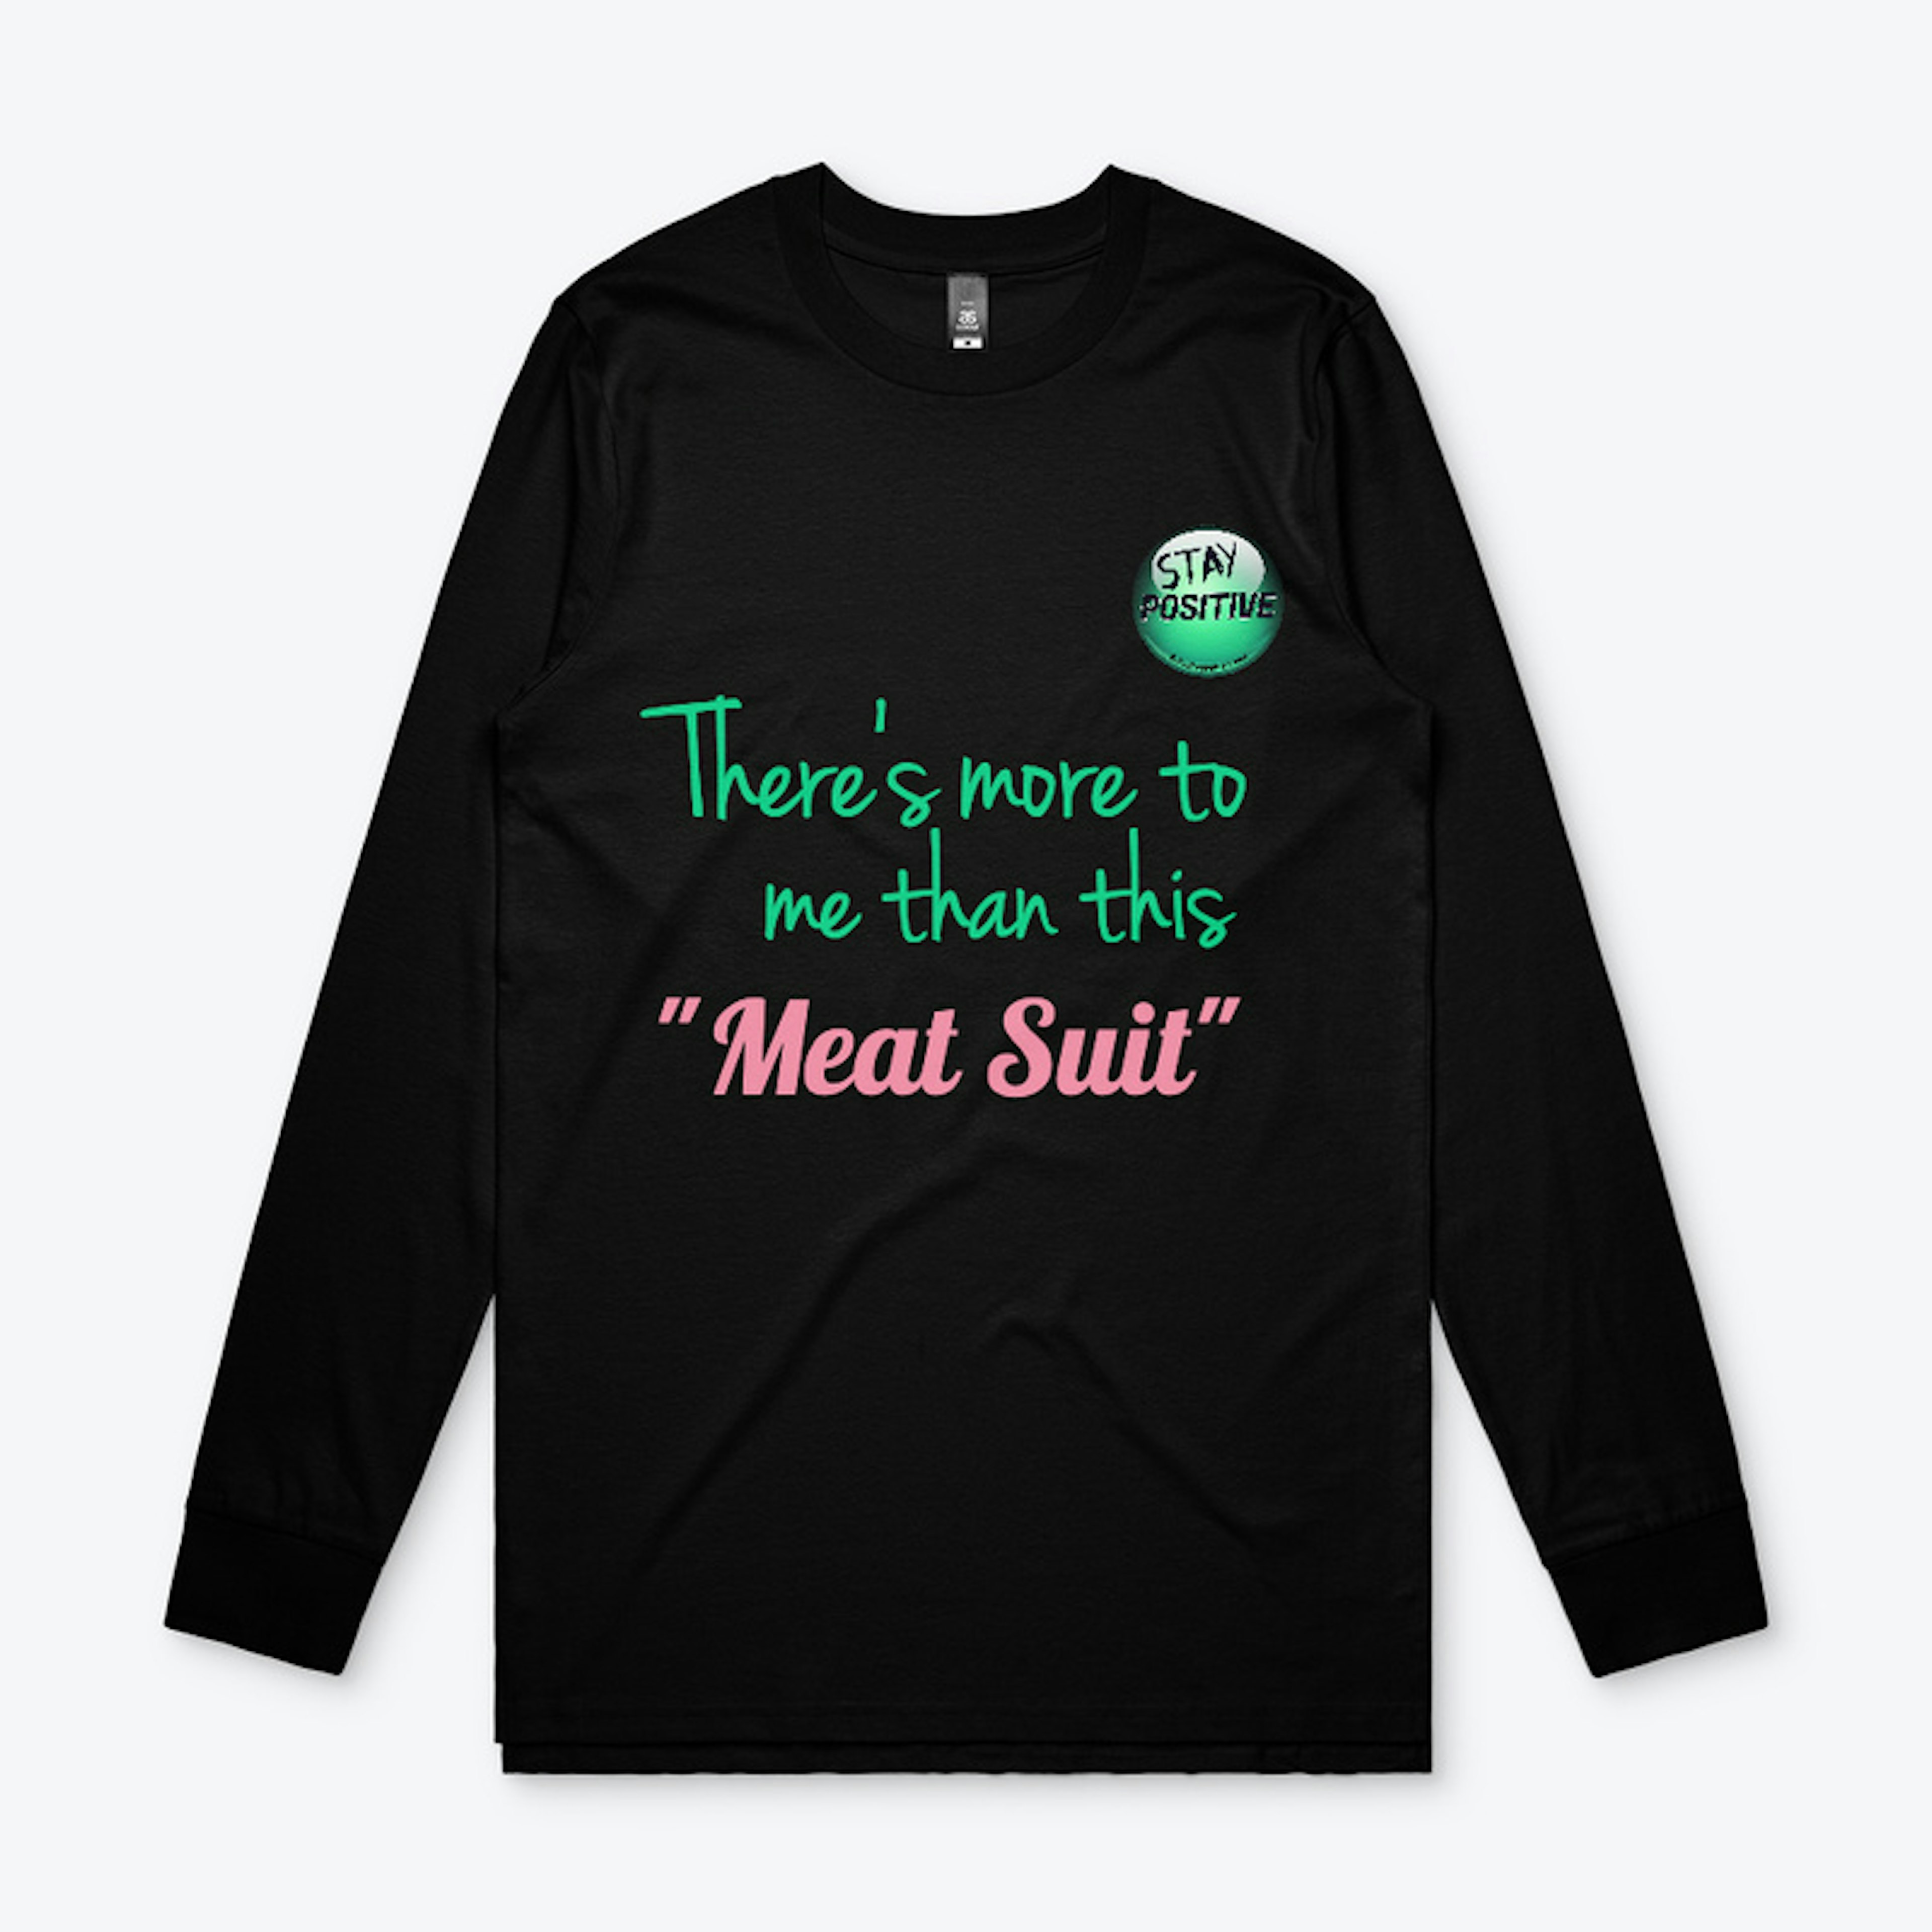 Meat Suit Quote Shirts